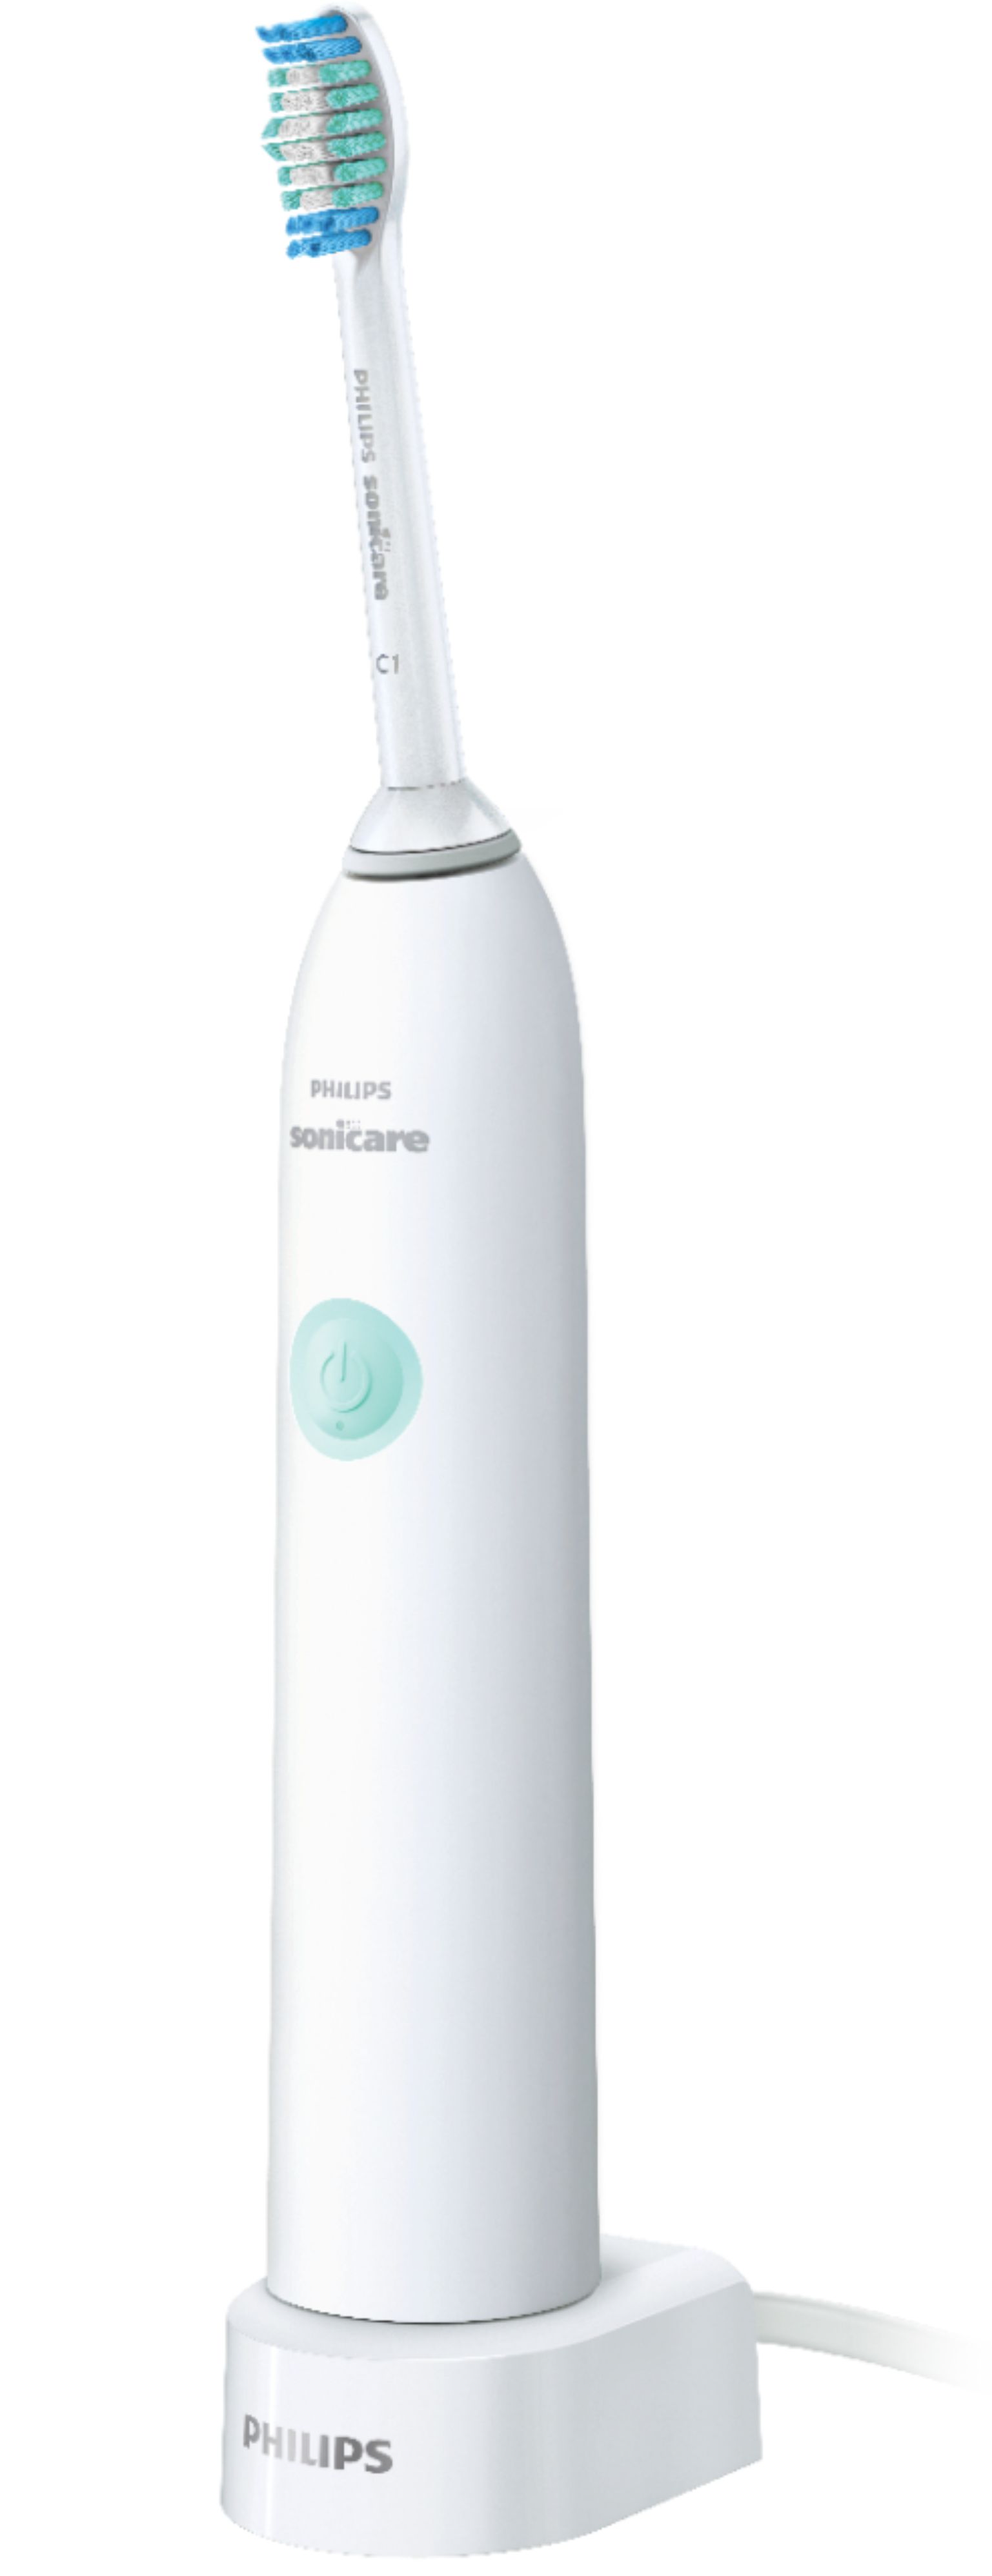 Philips Sonicare - Sonicare DailyClean 1100 Rechargeable Toothbrush - Mint